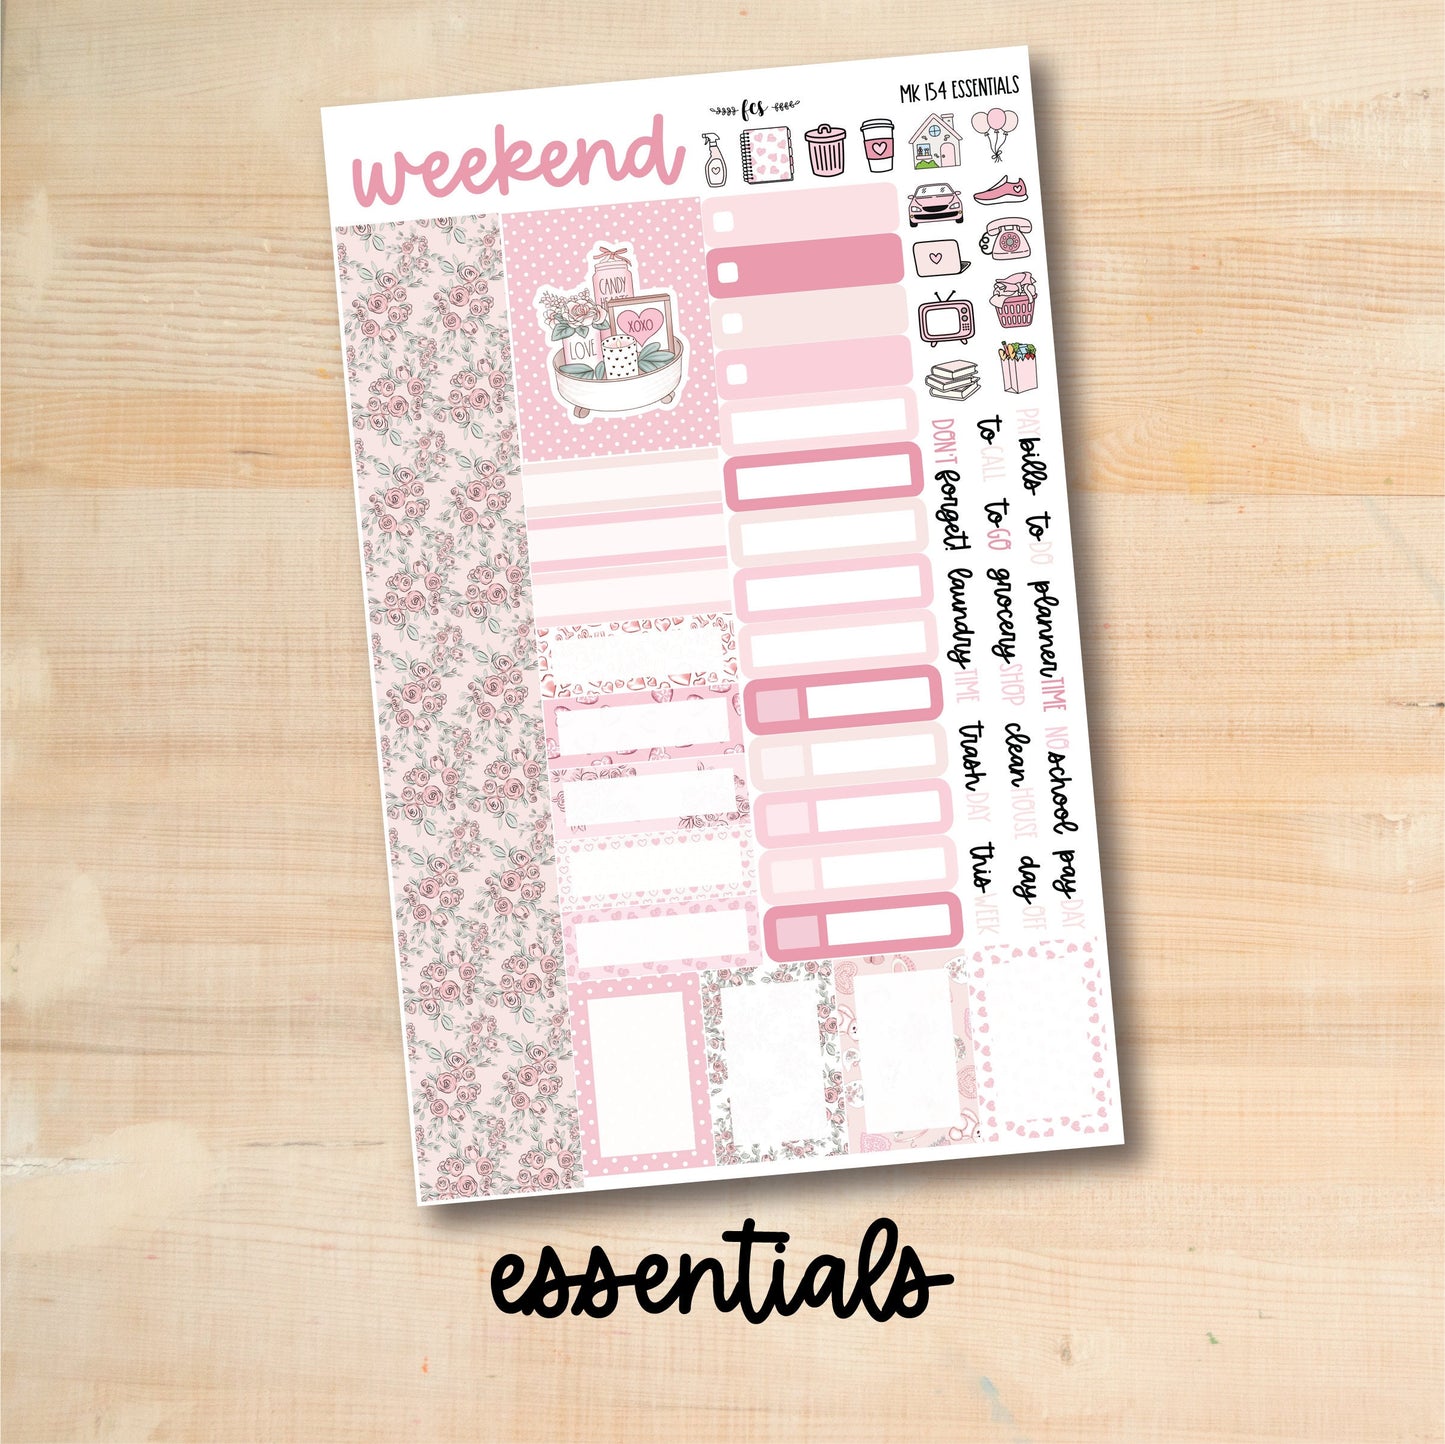 MK-154 || PINK LOVE weekly planner kit for Erin Condren, Plum Paper, MakseLife and more!